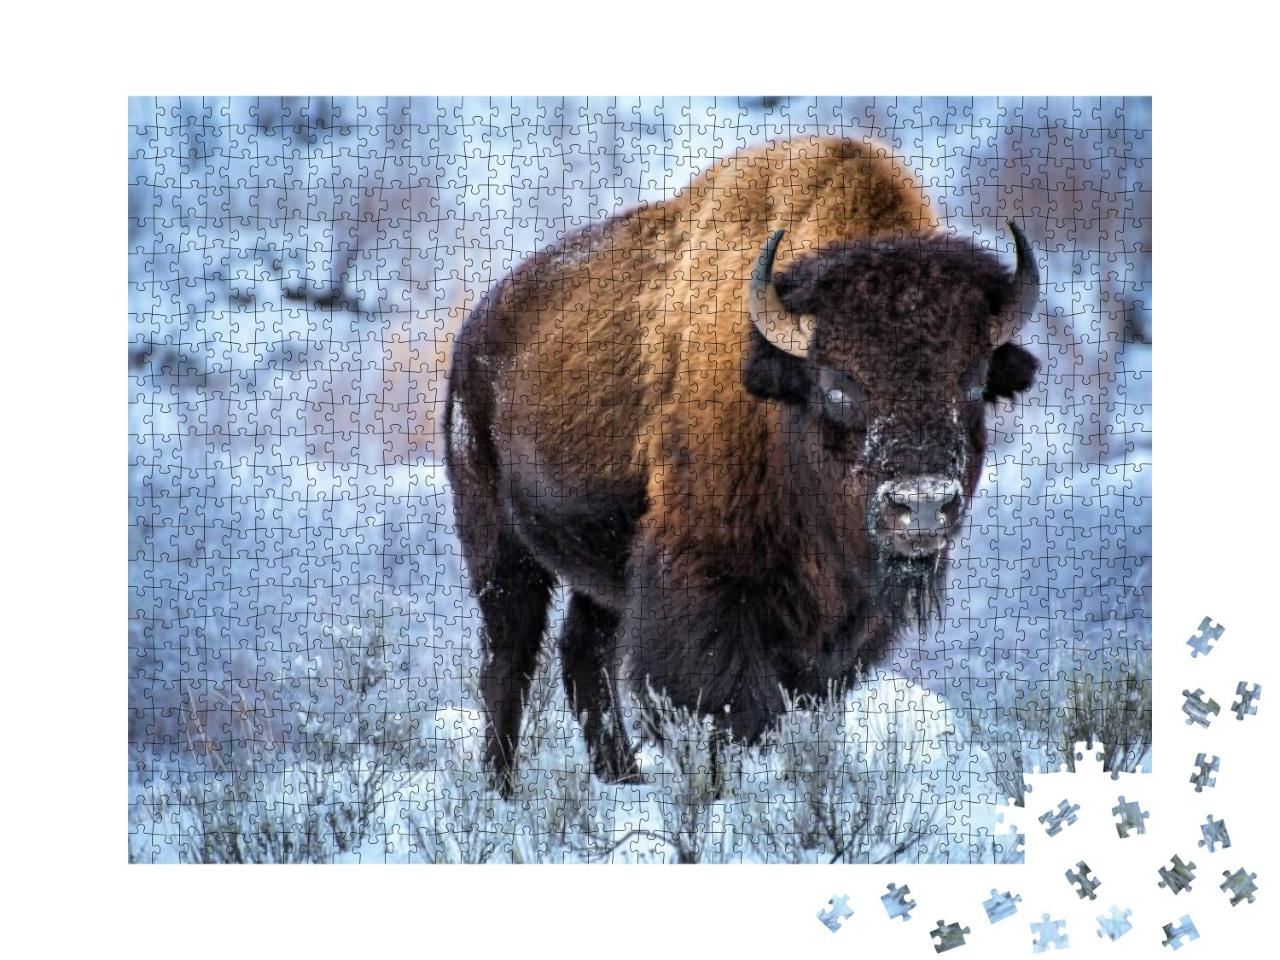 American Bison, Cower with Snow in Winter, Yellowstone Na... Jigsaw Puzzle with 1000 pieces